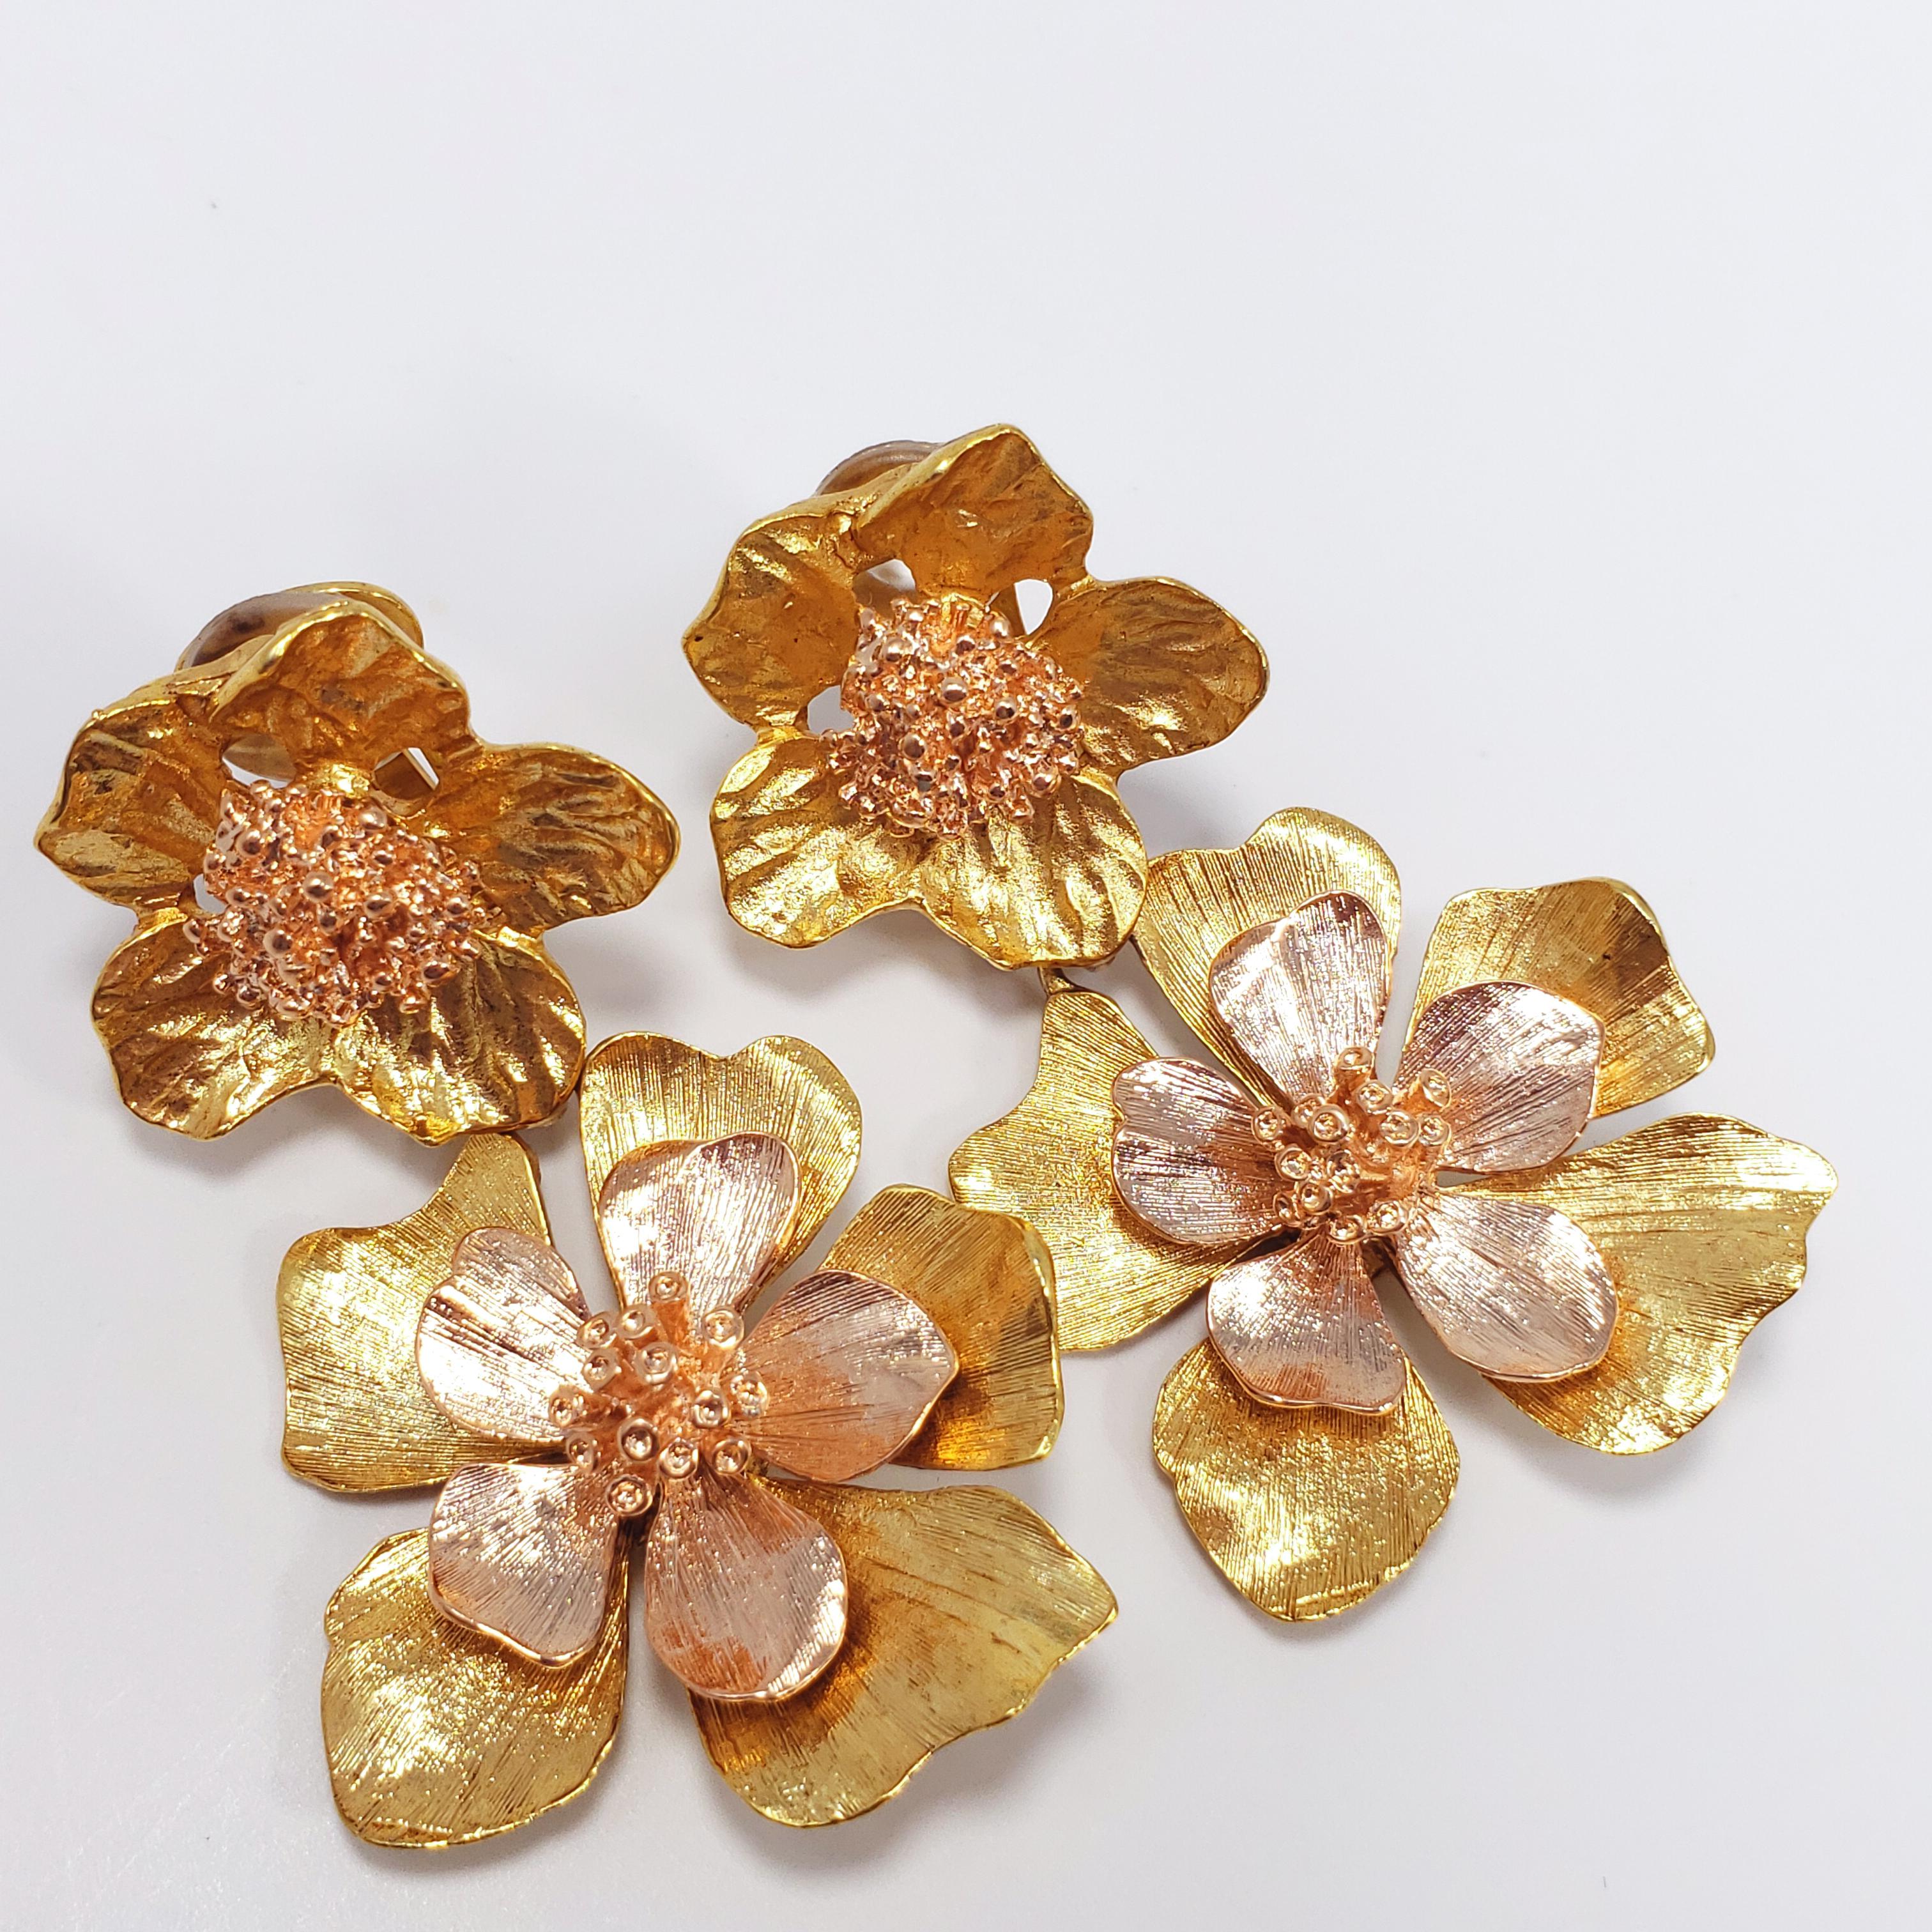 Loud and vibrant dangling clip-ons, featuring two dangling flowers on each earring, plated in 22K bright yellow gold. These Oscar de la Renta gold bold flower earrings definitely live up to their name!

6.5cm in length. The larger flower motif is